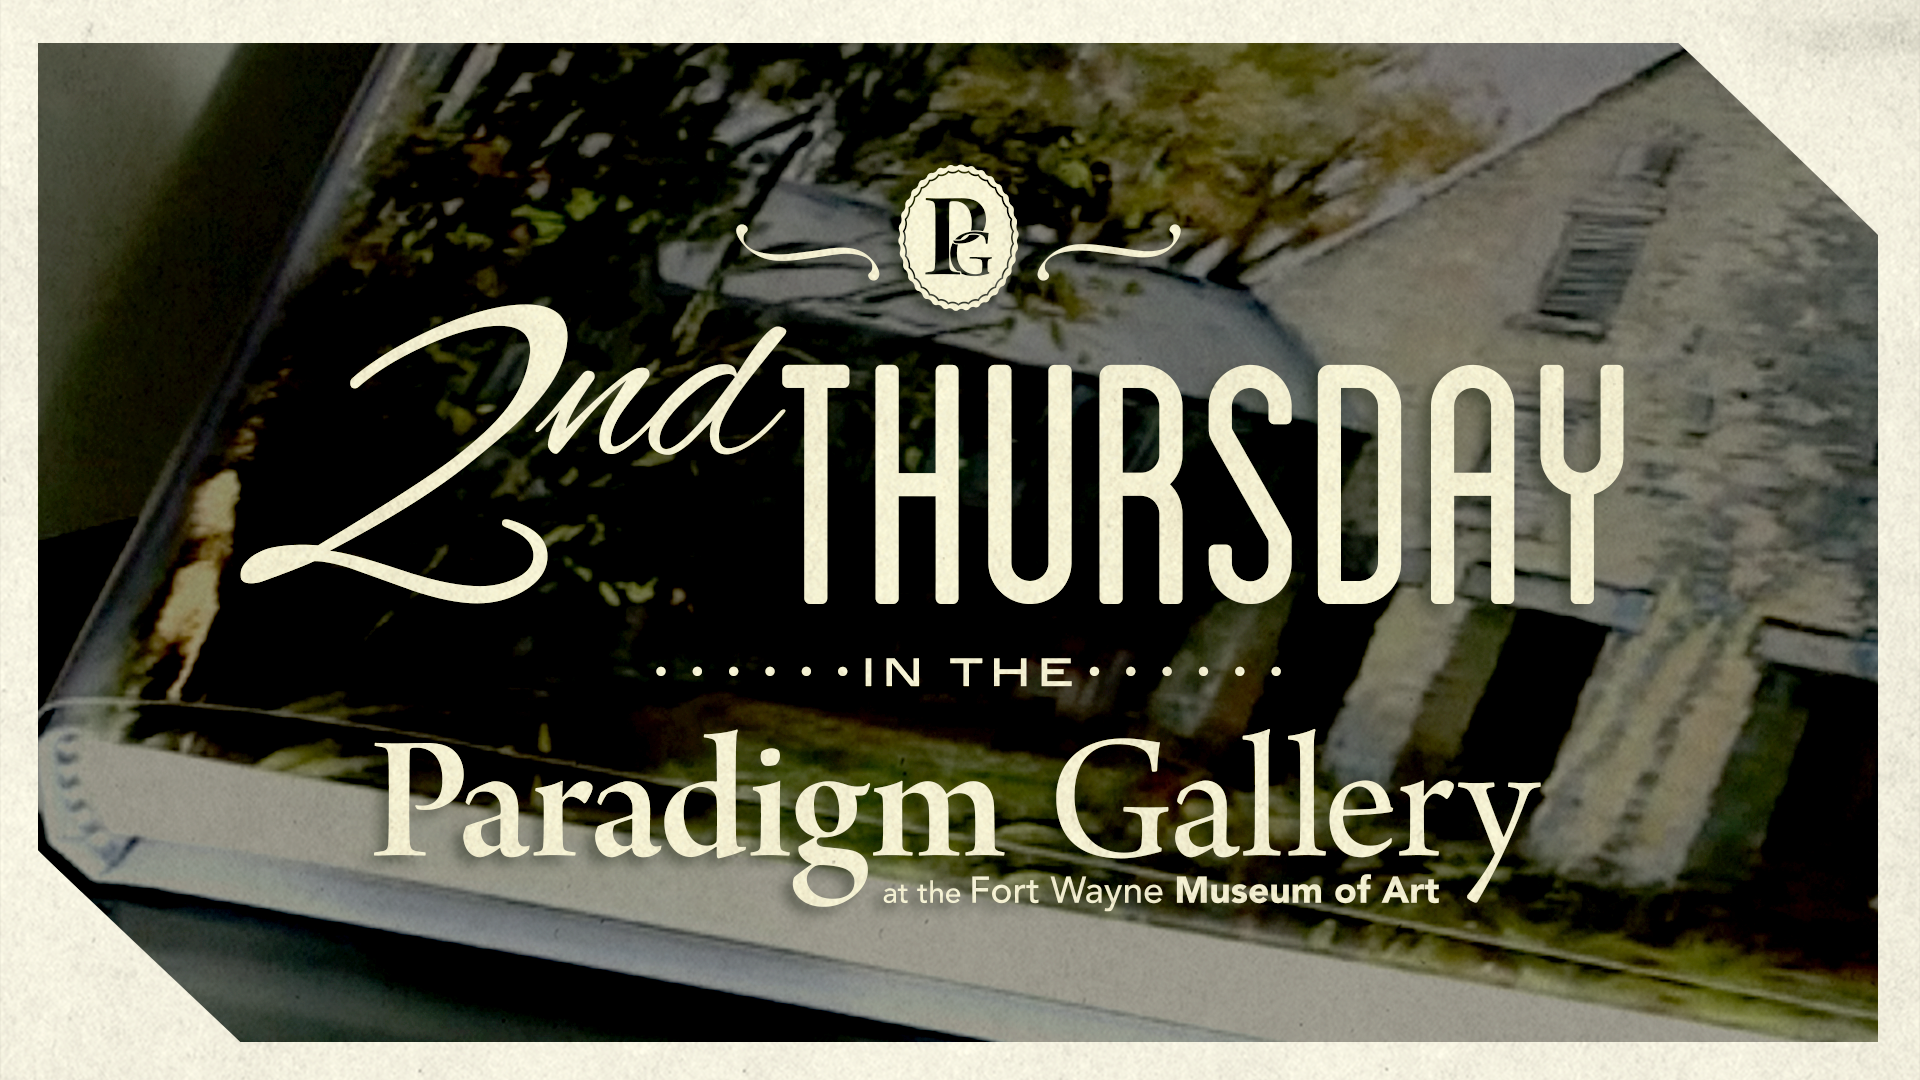 2nd Thursday in the Paradigm Gallery